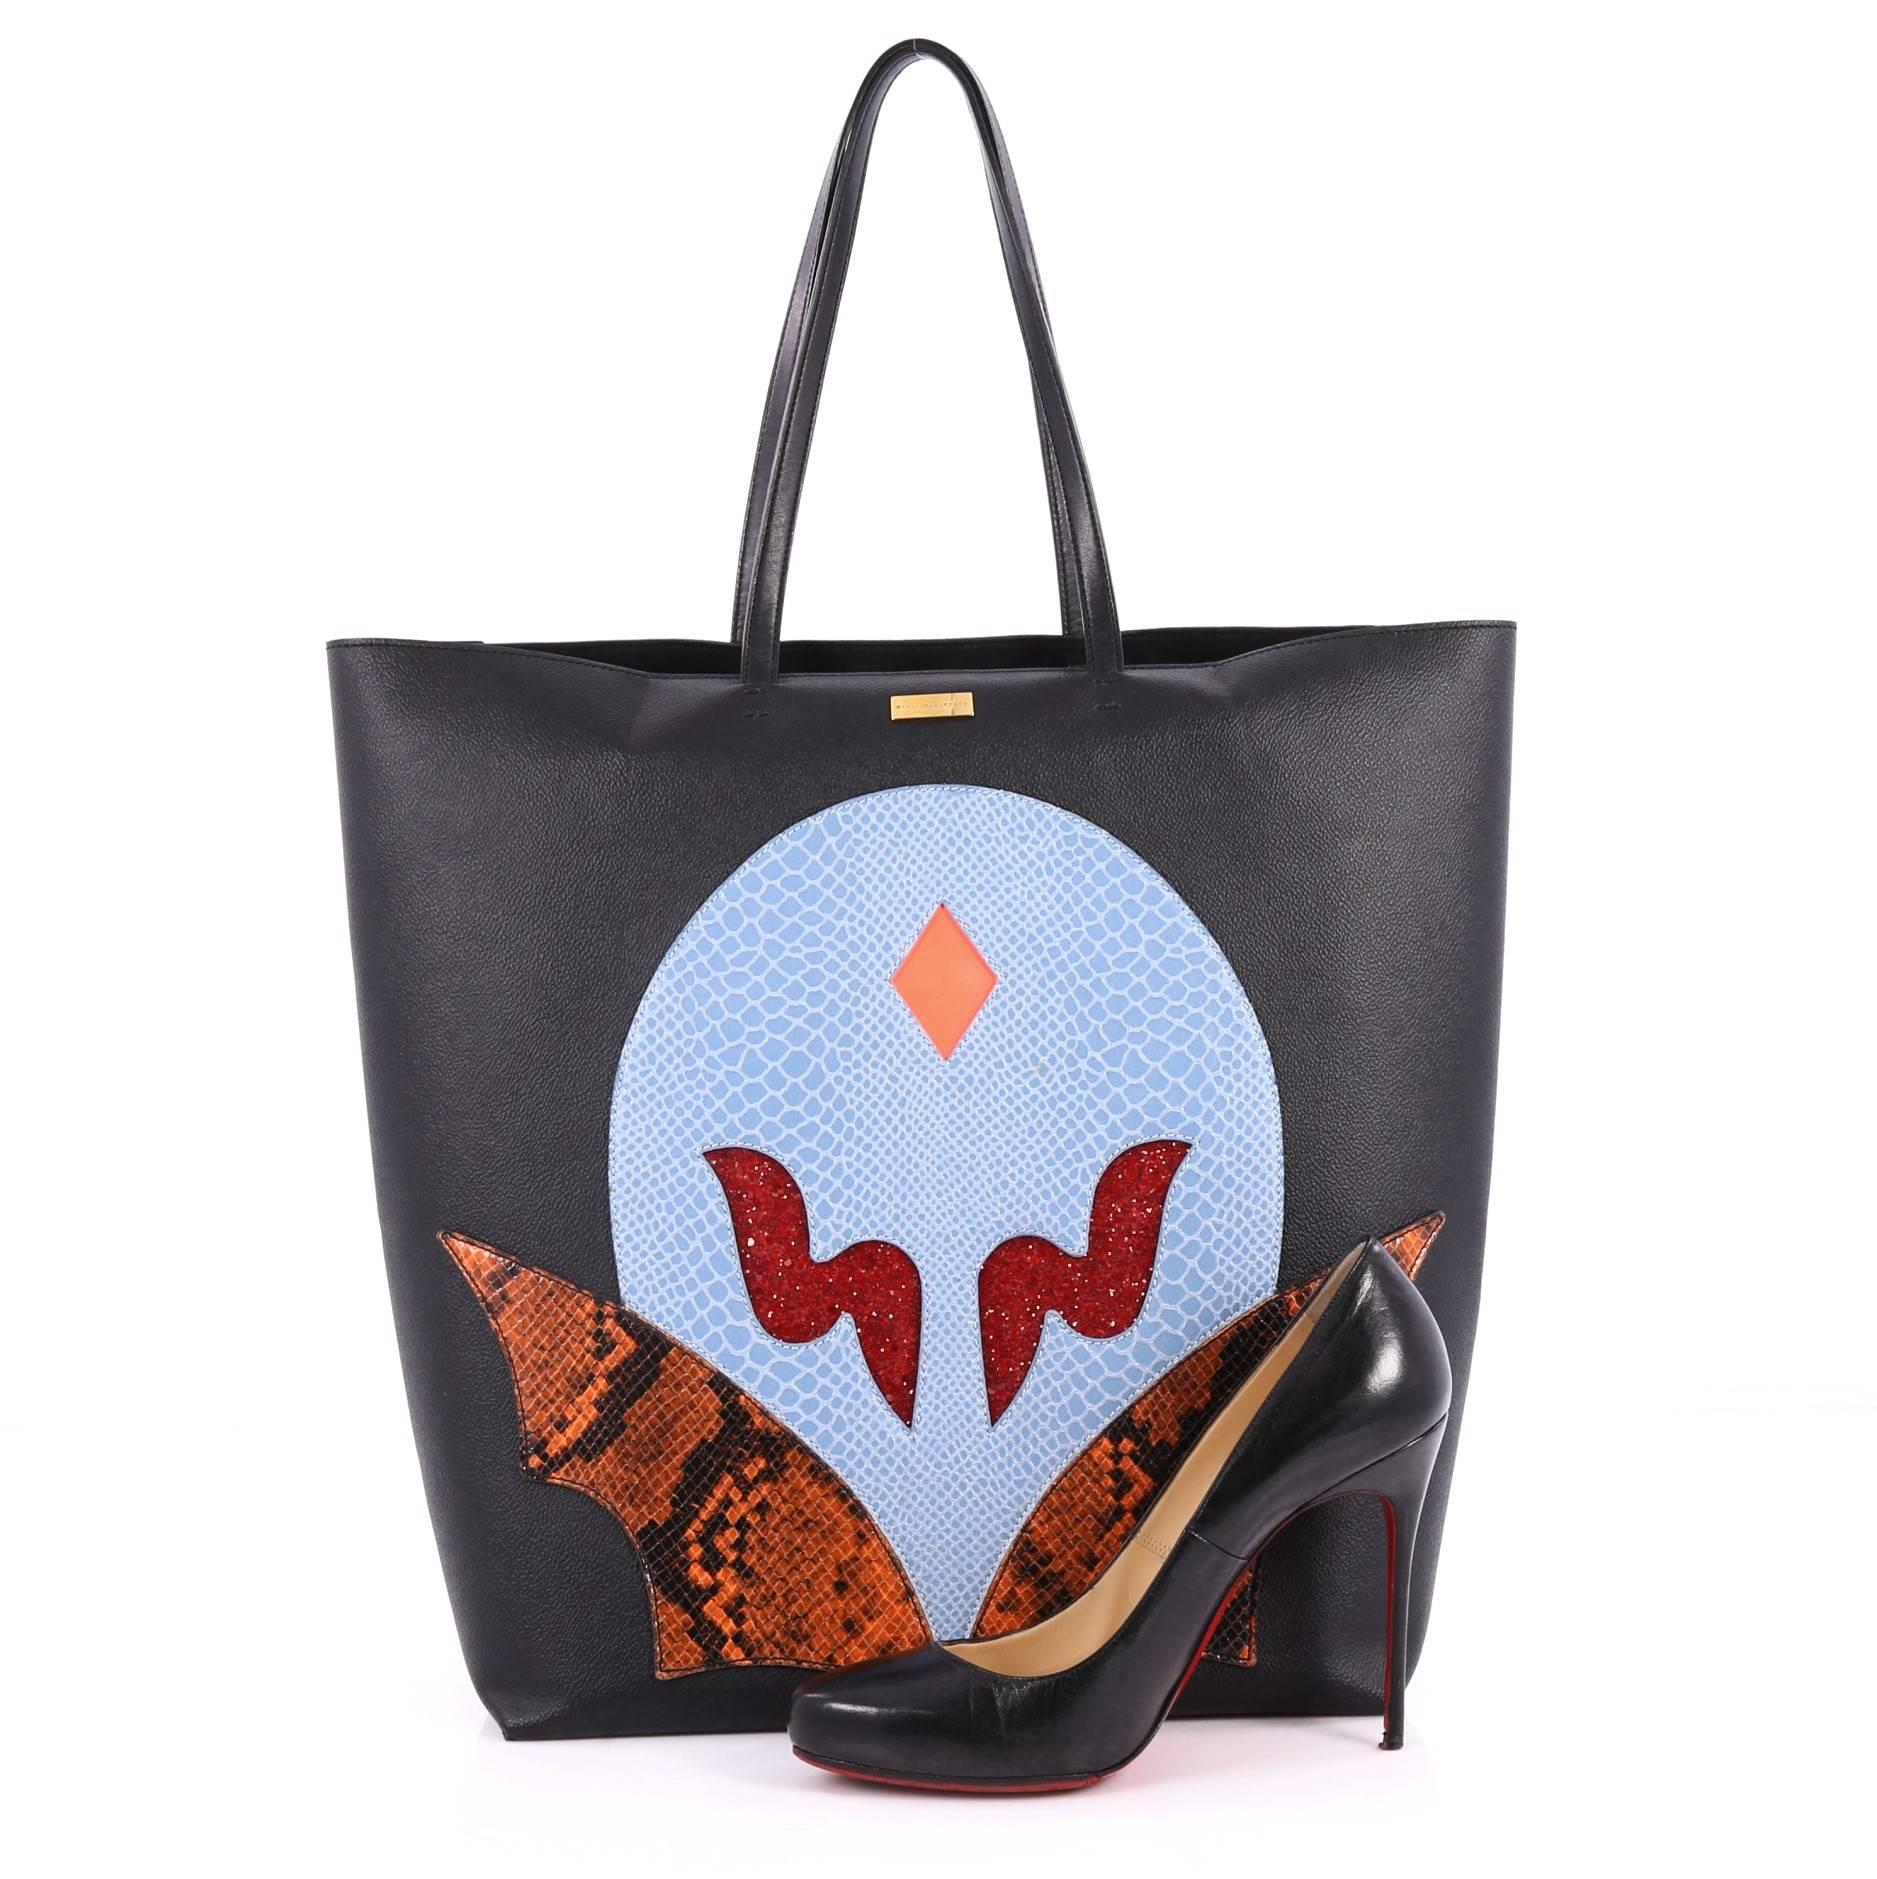 This authentic Stella McCartney Super Hero Tote Faux Leather, from the brands' Resort 2015 Collection, is a fashion-forward bag made for on-the-go moments. Crafted in black faux leather, this unique tote features dual-thin leather handles, super